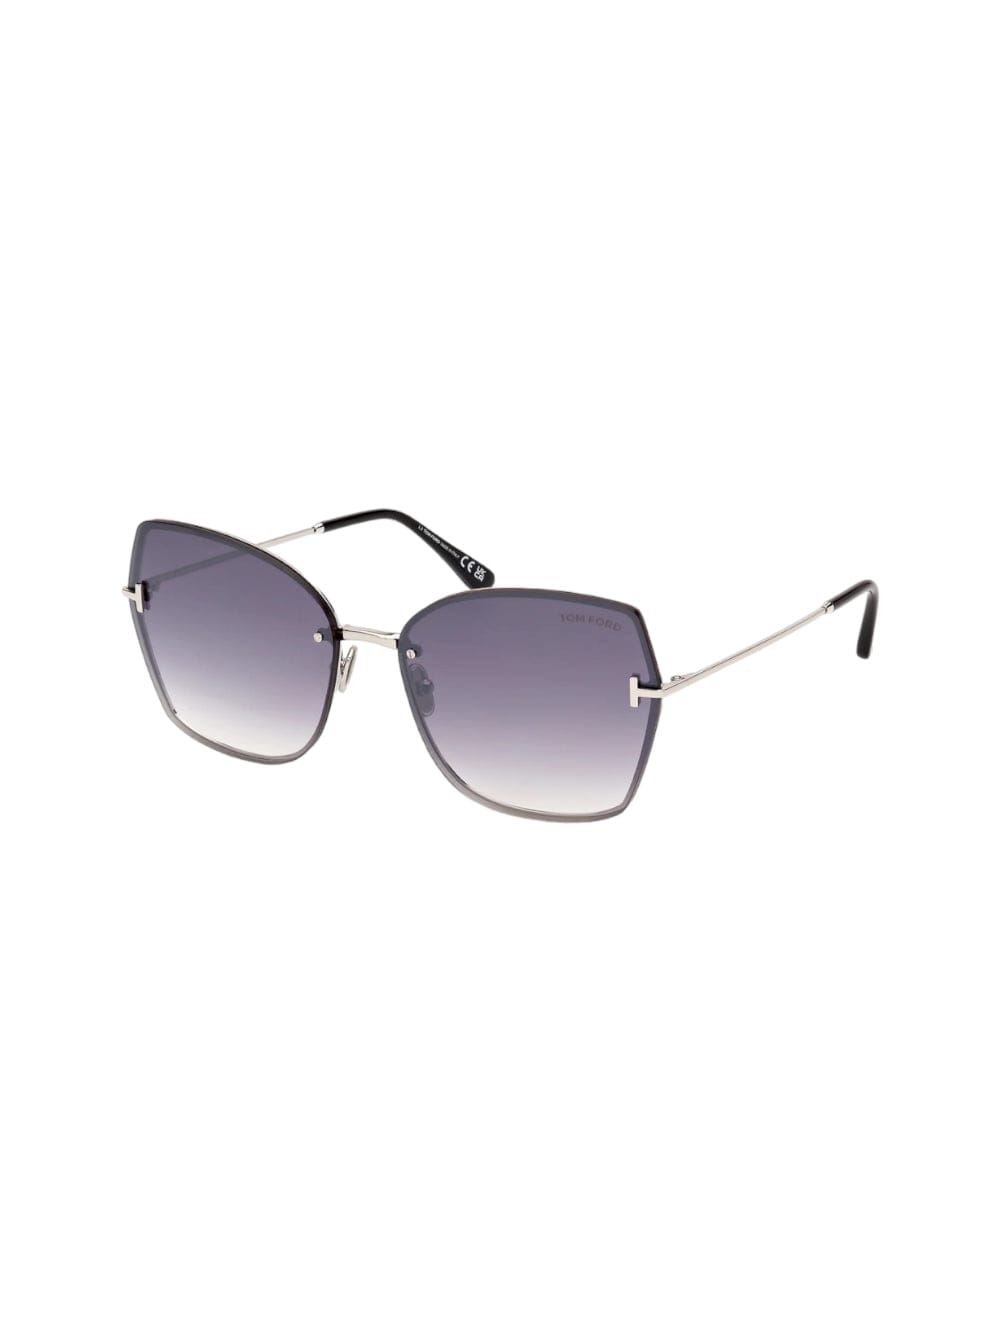 Tom Ford Nickie - Ft 1107 /s Sunglasses In Grey